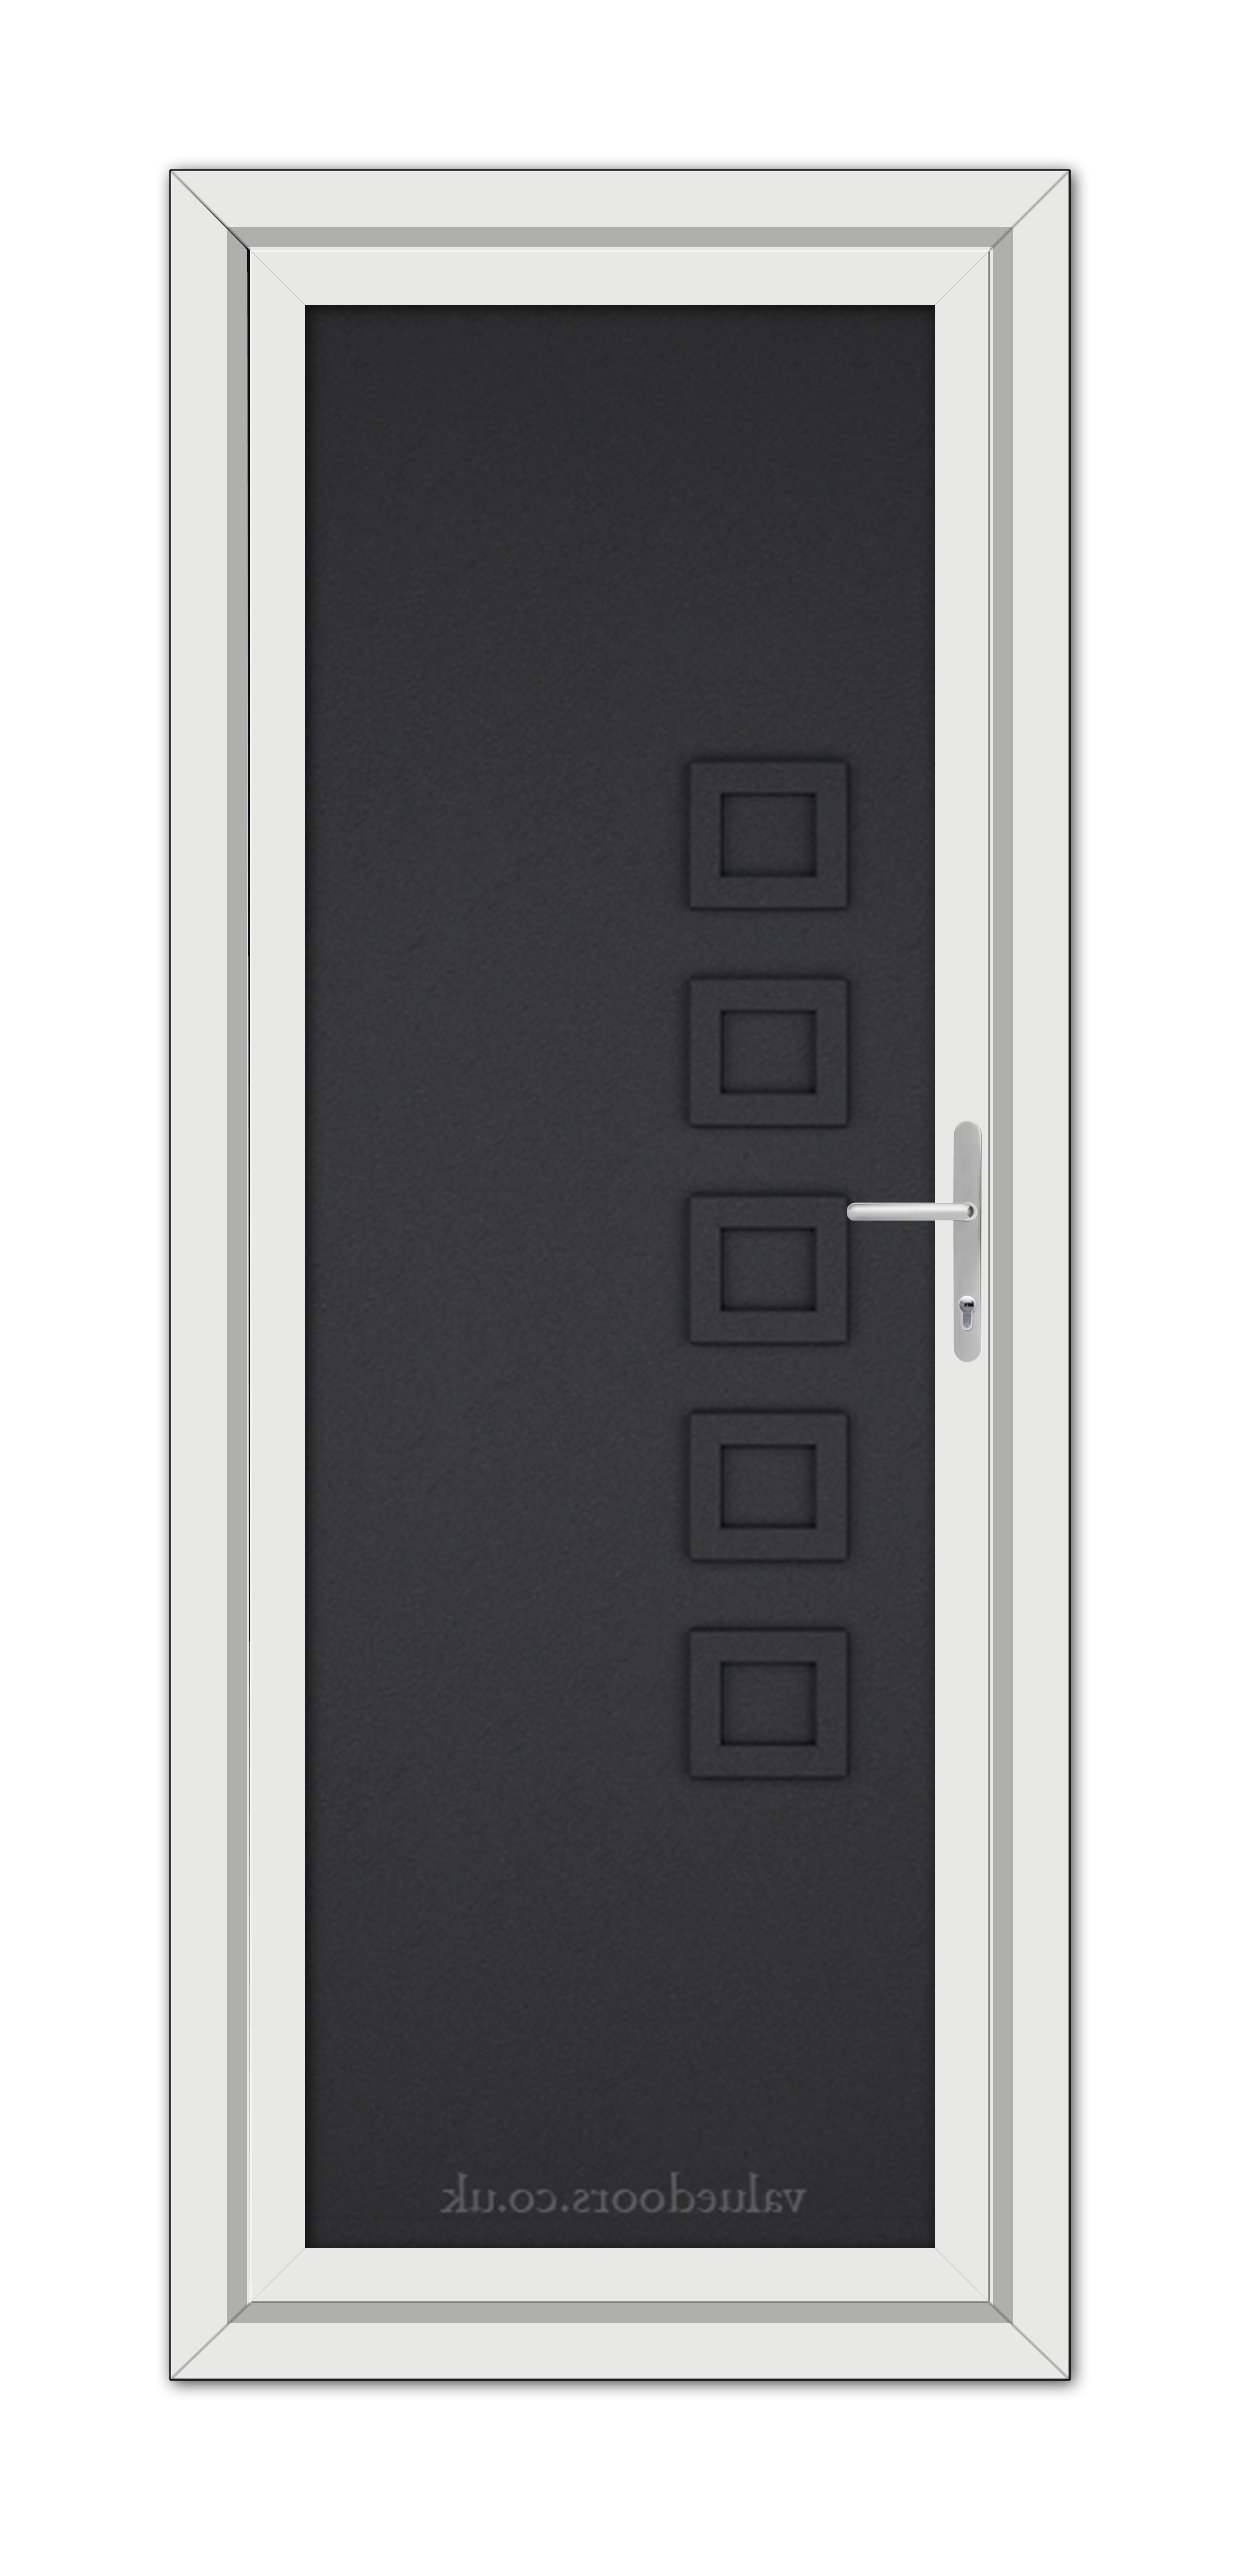 A modern, vertical Black Brown Malaga Solid uPVC door with a dark panel featuring five square windows arranged linearly and a metallic handle on the right.